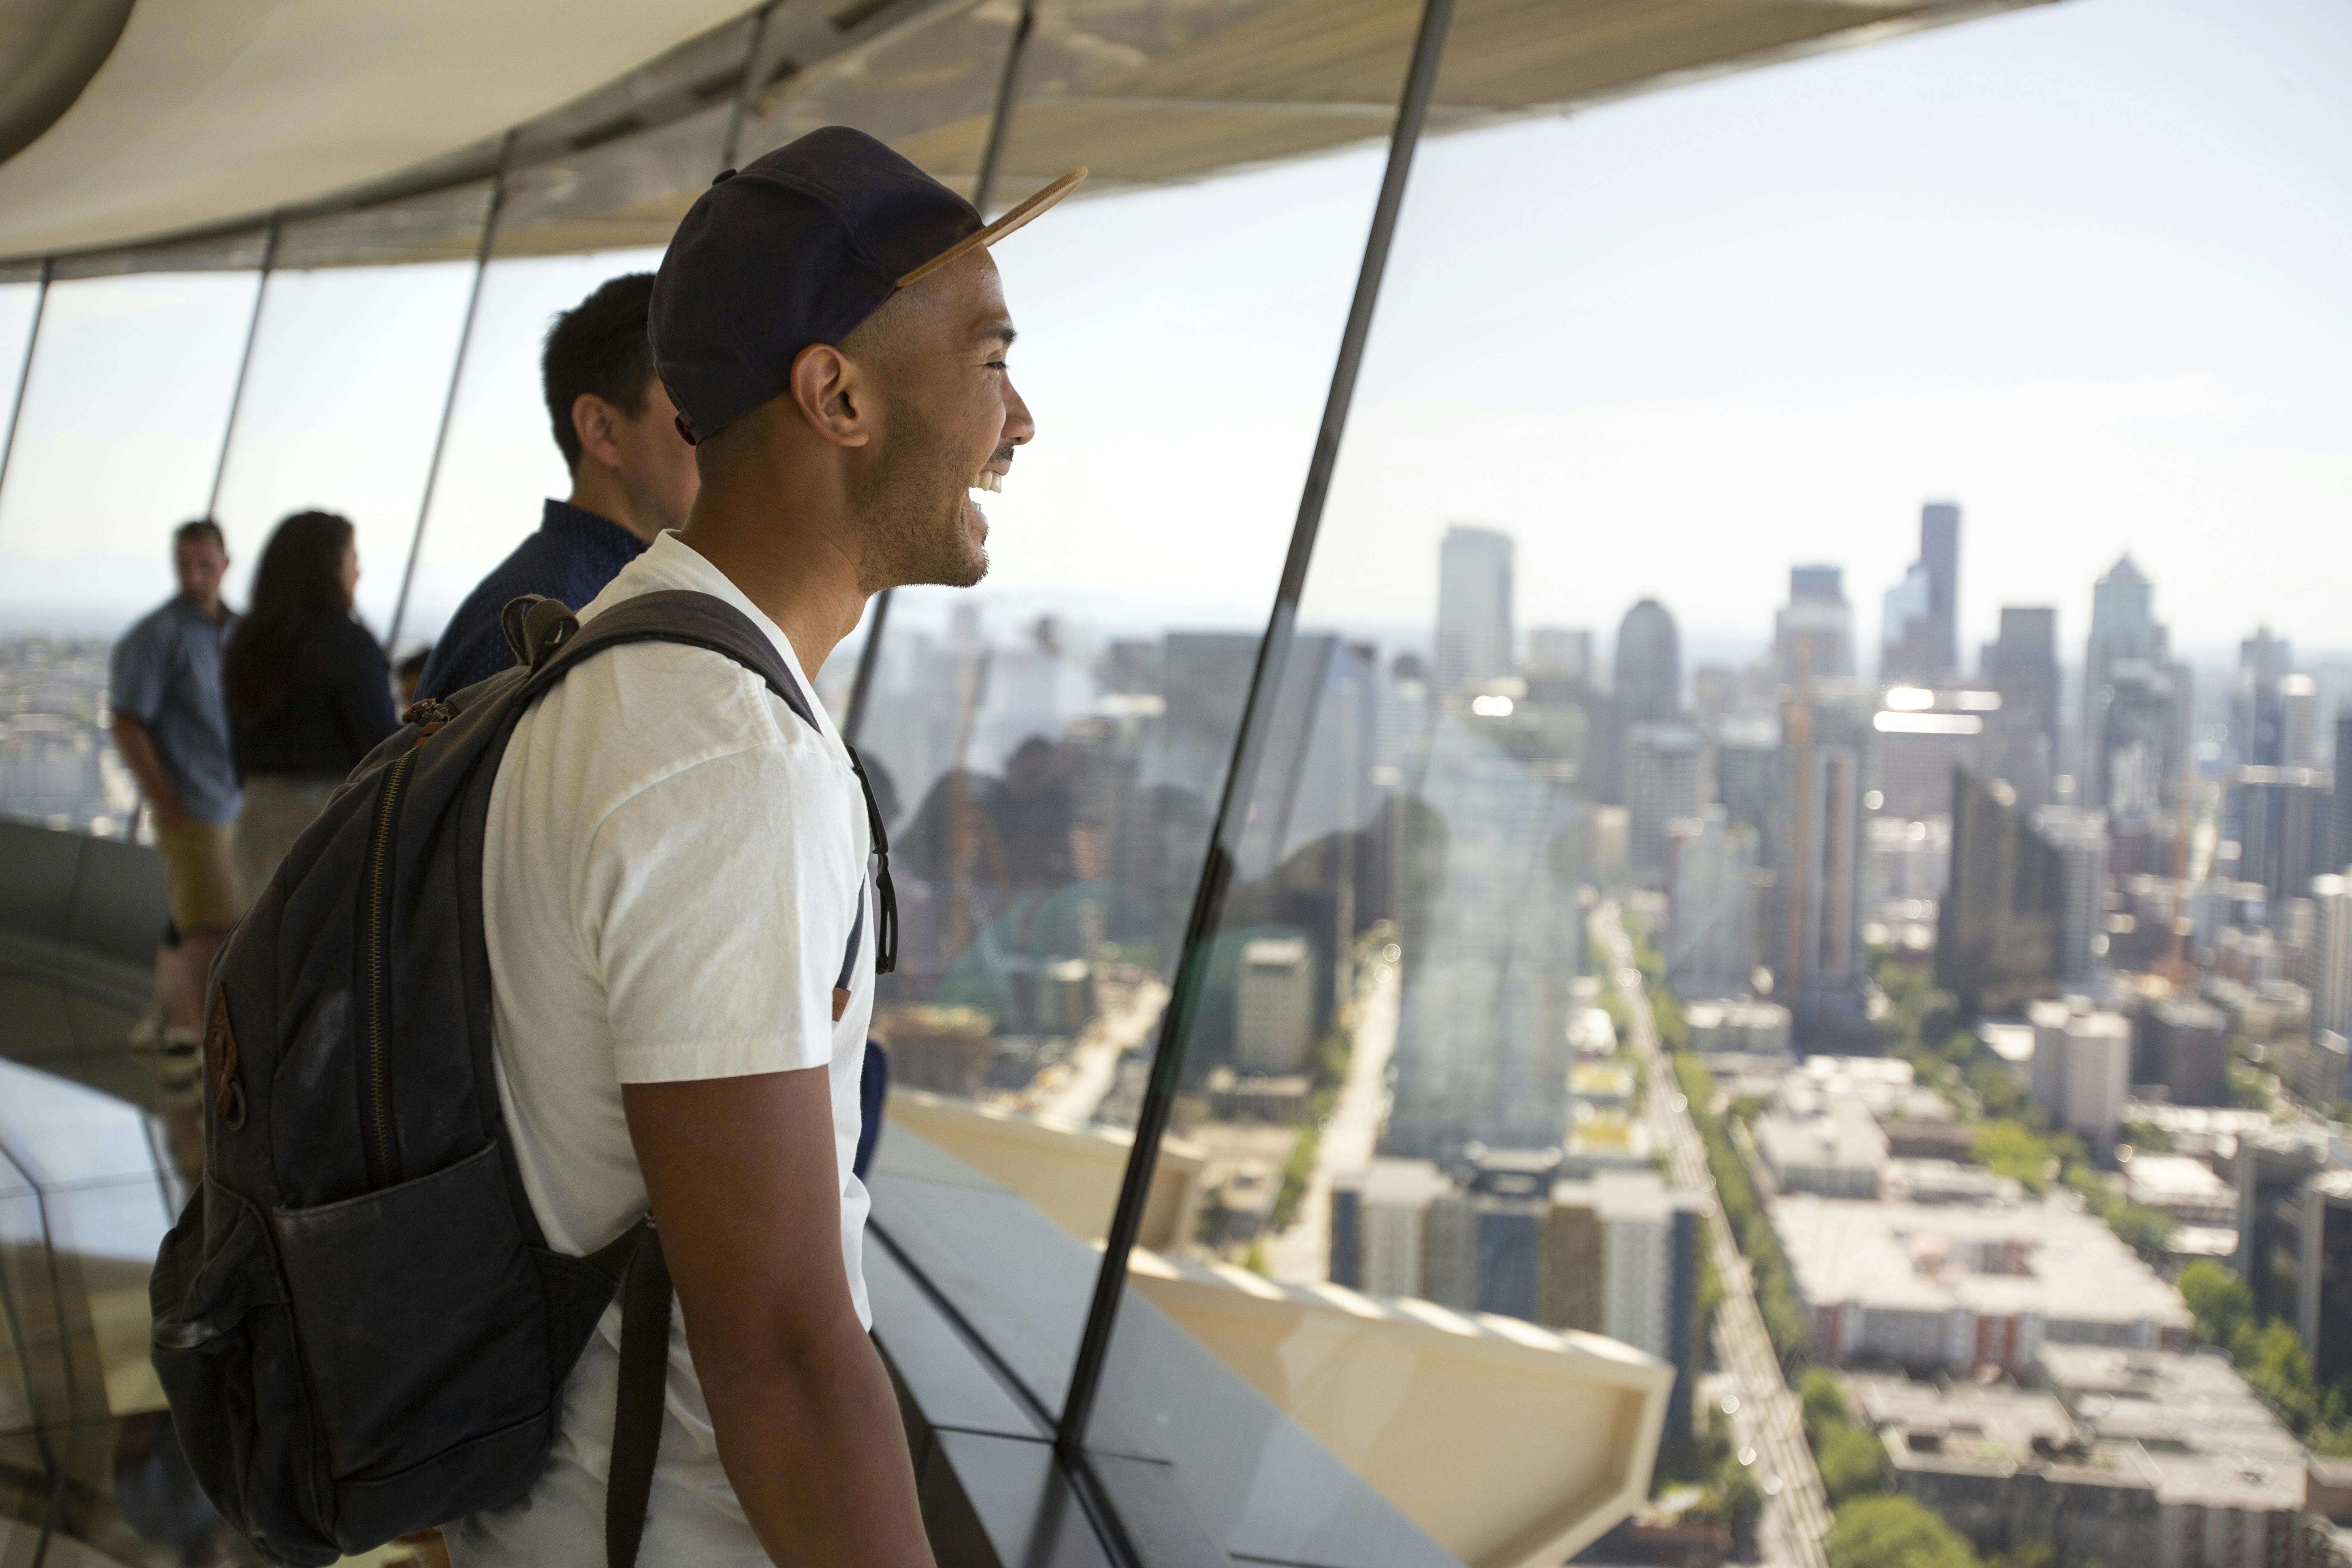 Guest enjoys views of downtown Seattle from the Space Needle glass floor - The Loupe.jpg